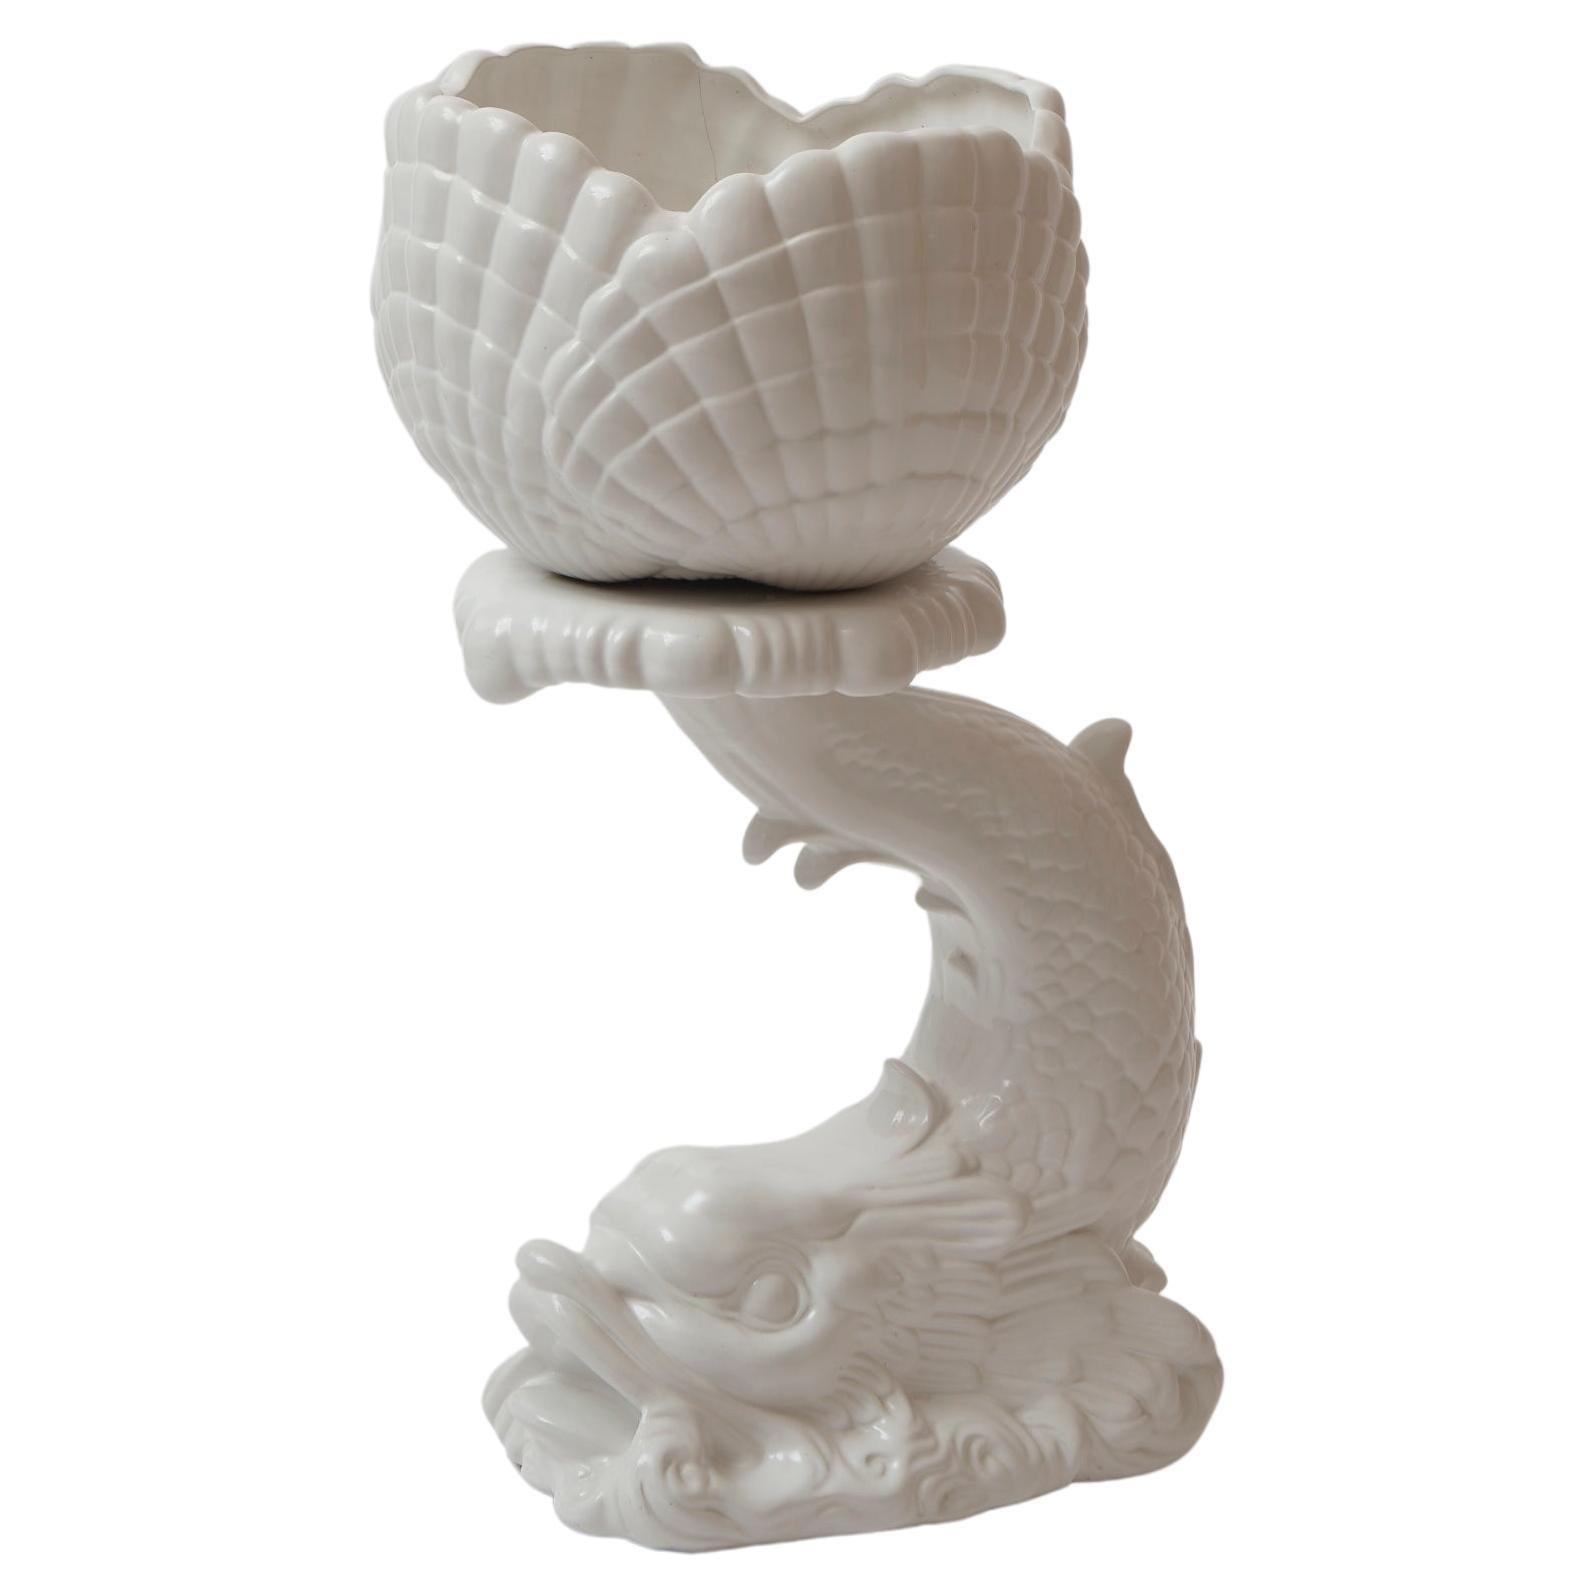 Big and crazy porcelain plant stand in the shape of a dragonish fish